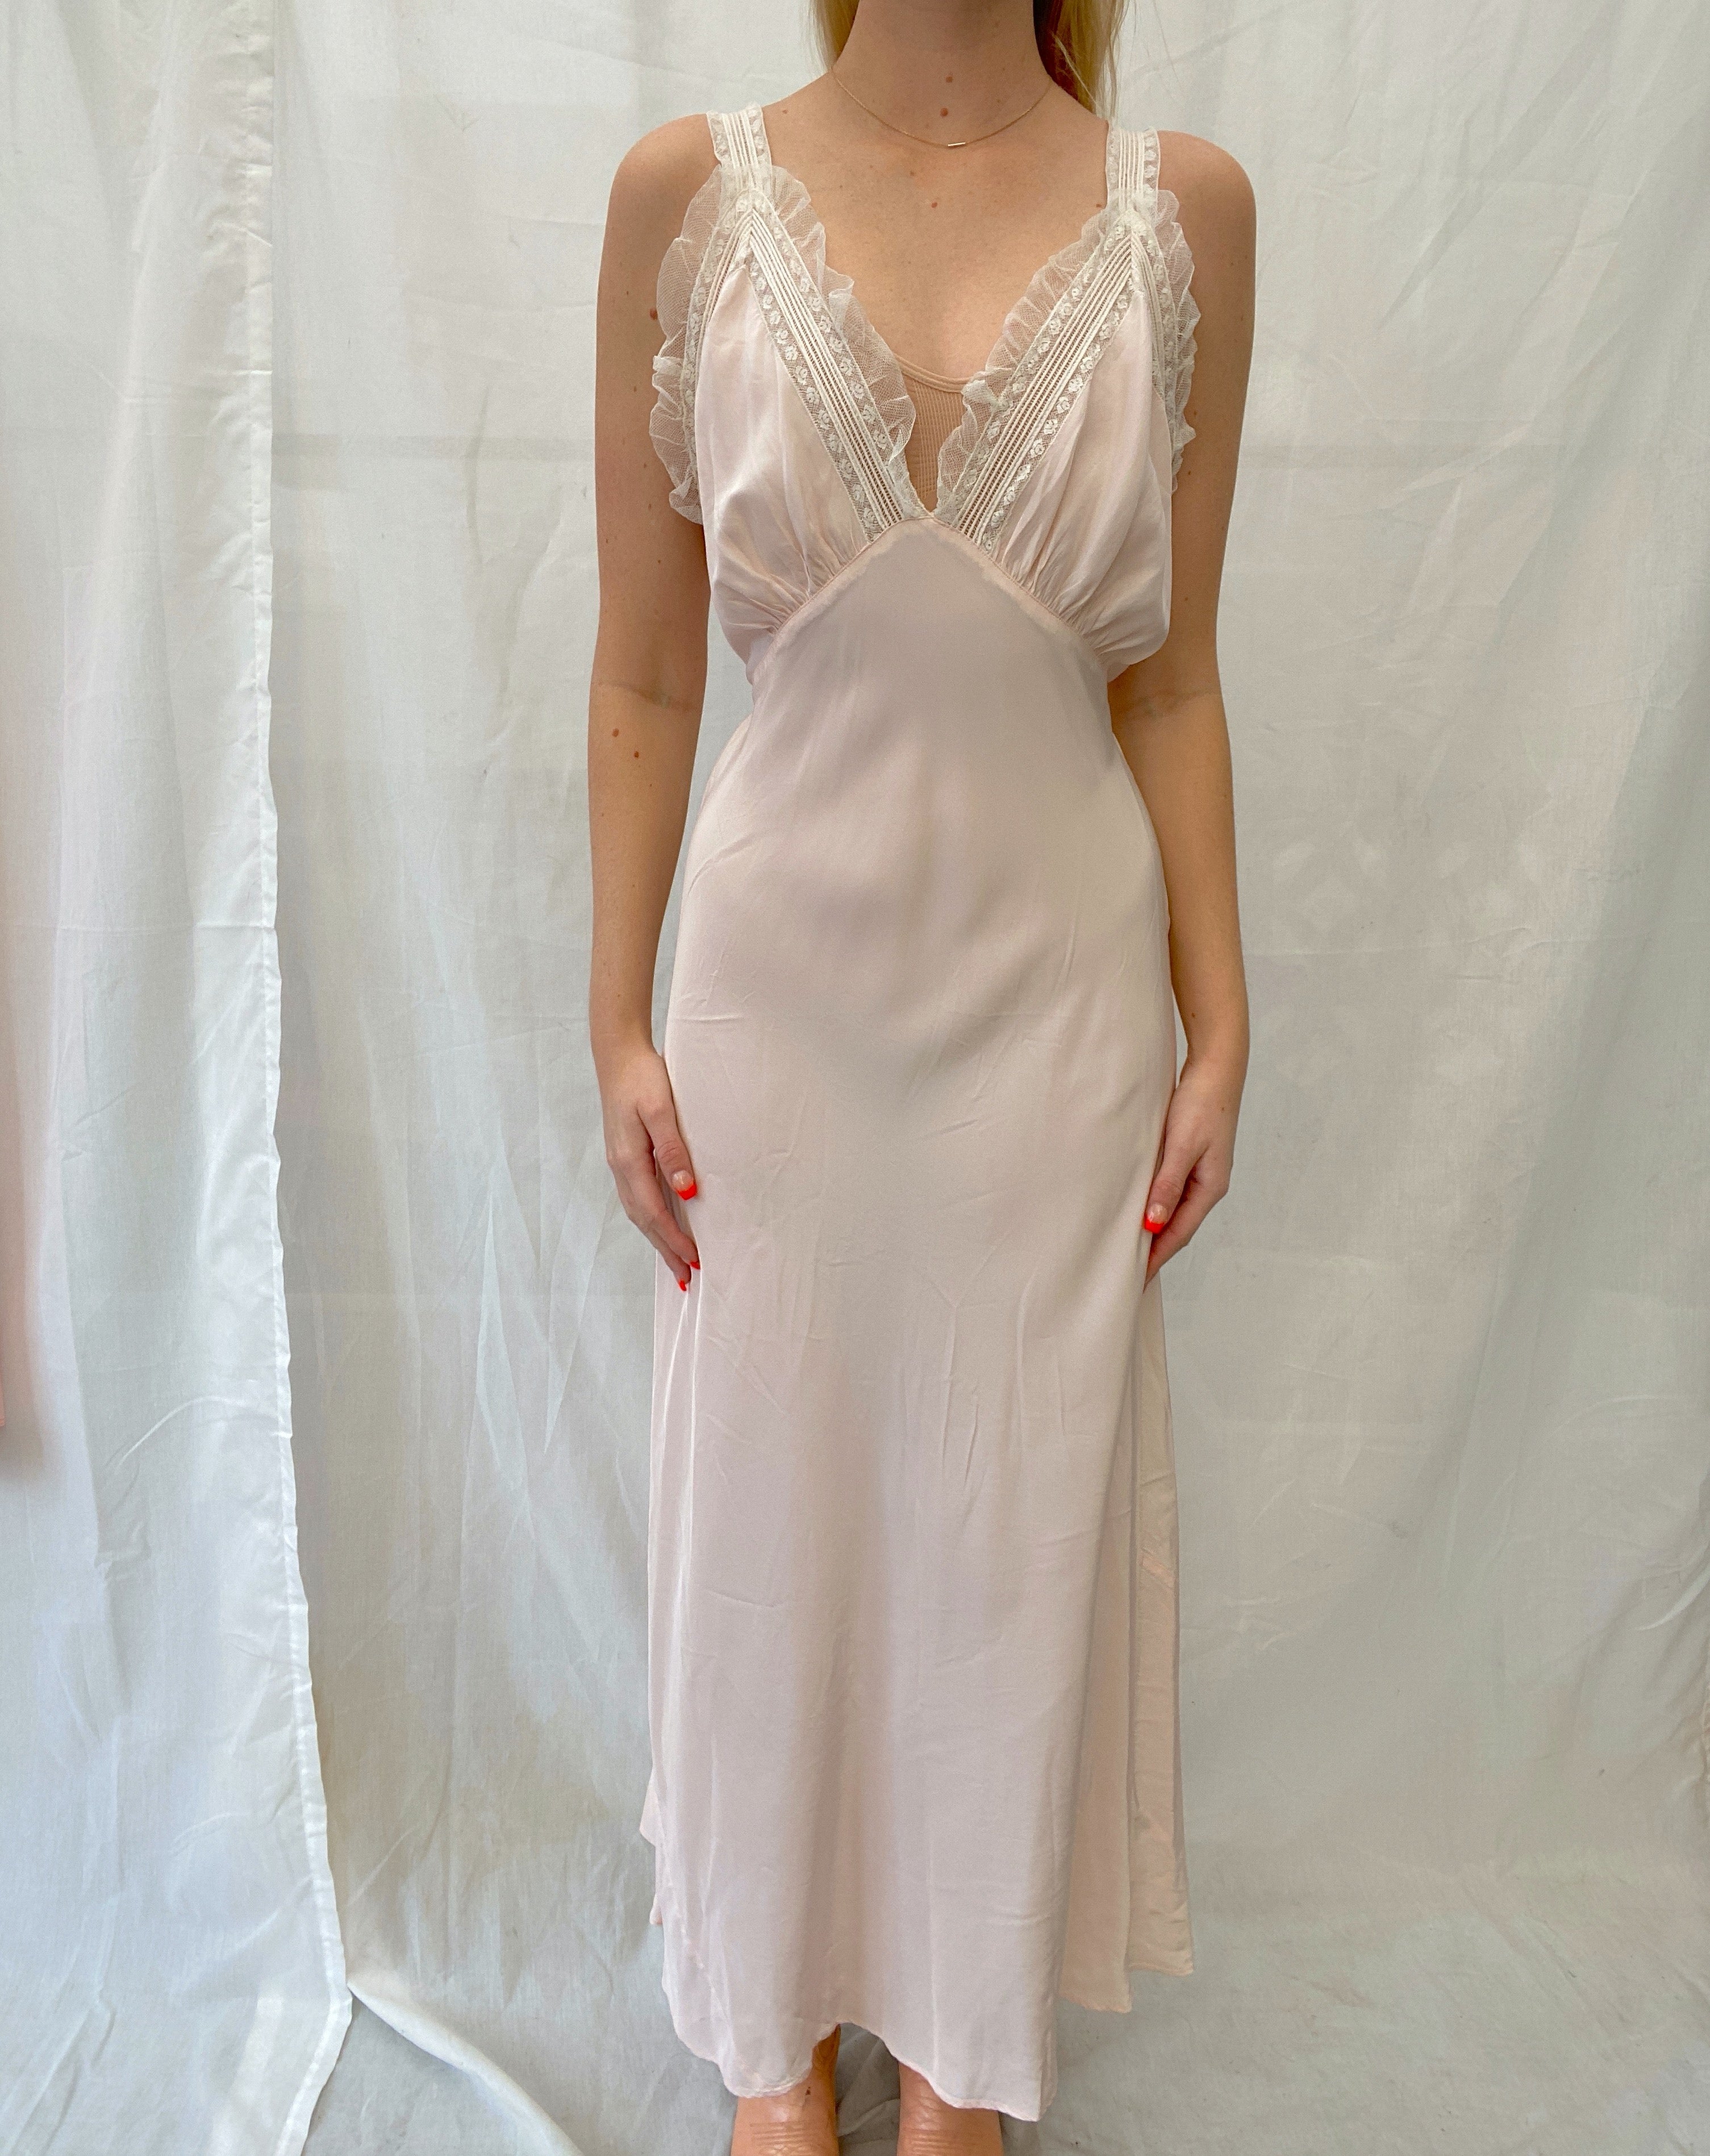 1940's Blush Pink Slip with White Lace